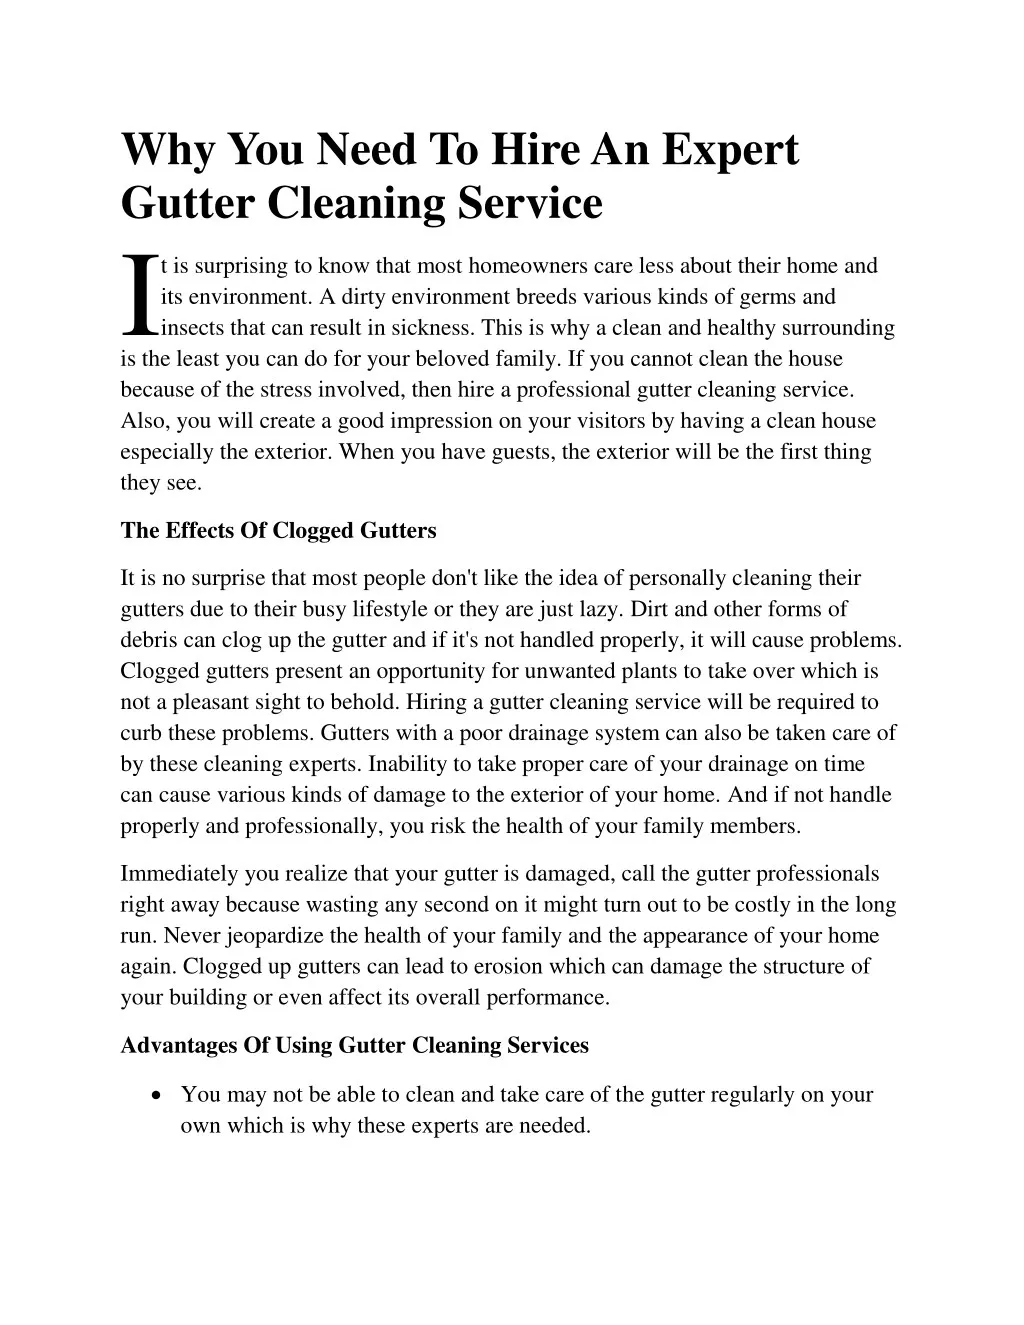 why you need to hire an expert gutter cleaning